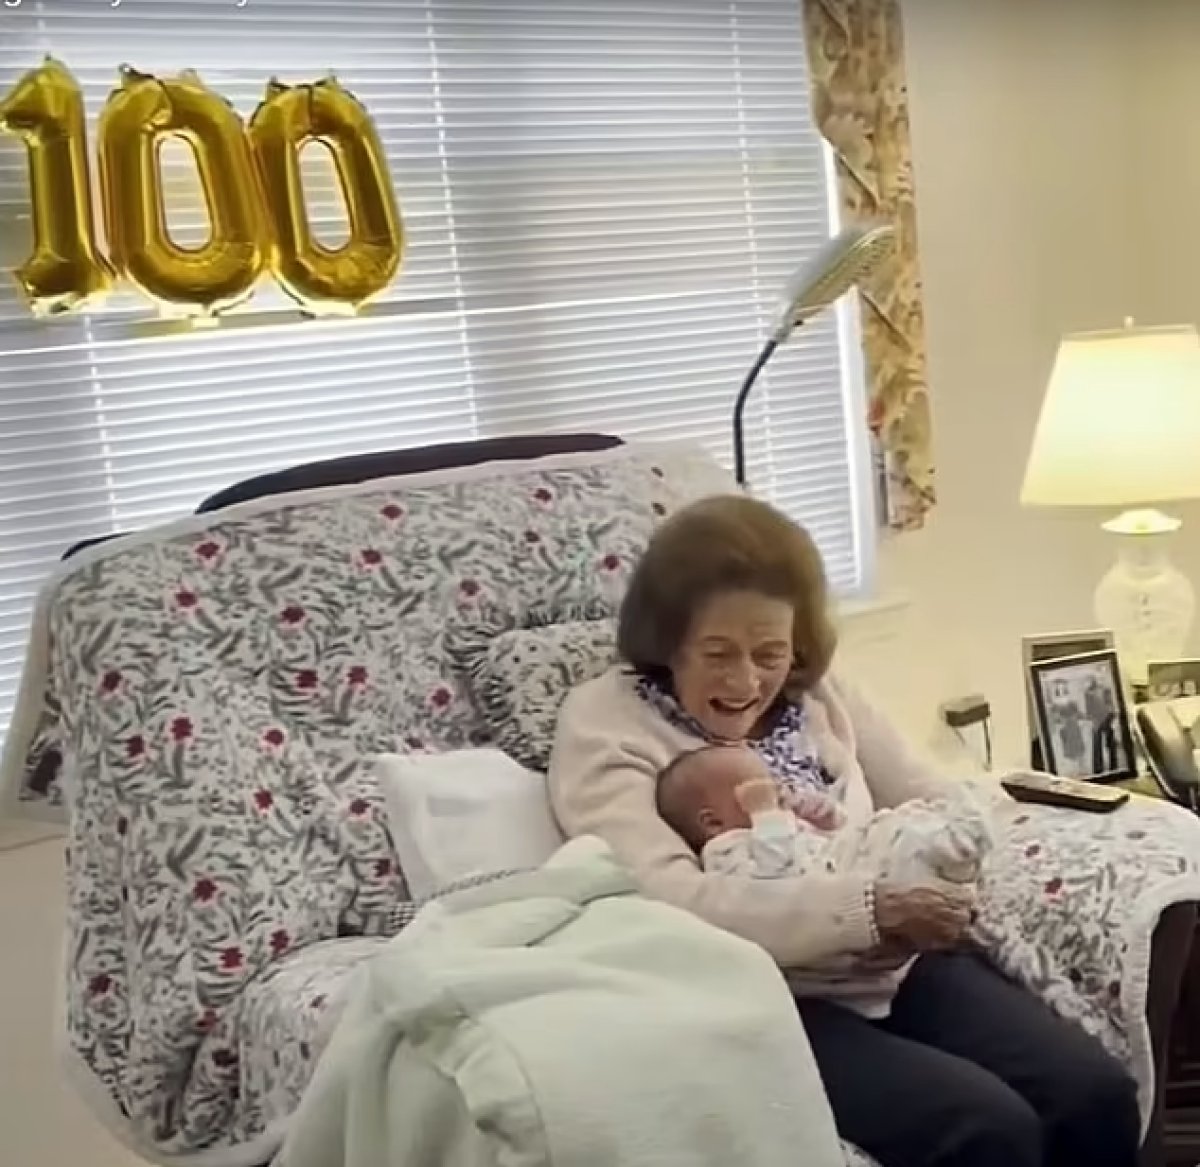 Marguerite Koller, living in the USA, saw her 100th grandchild #3